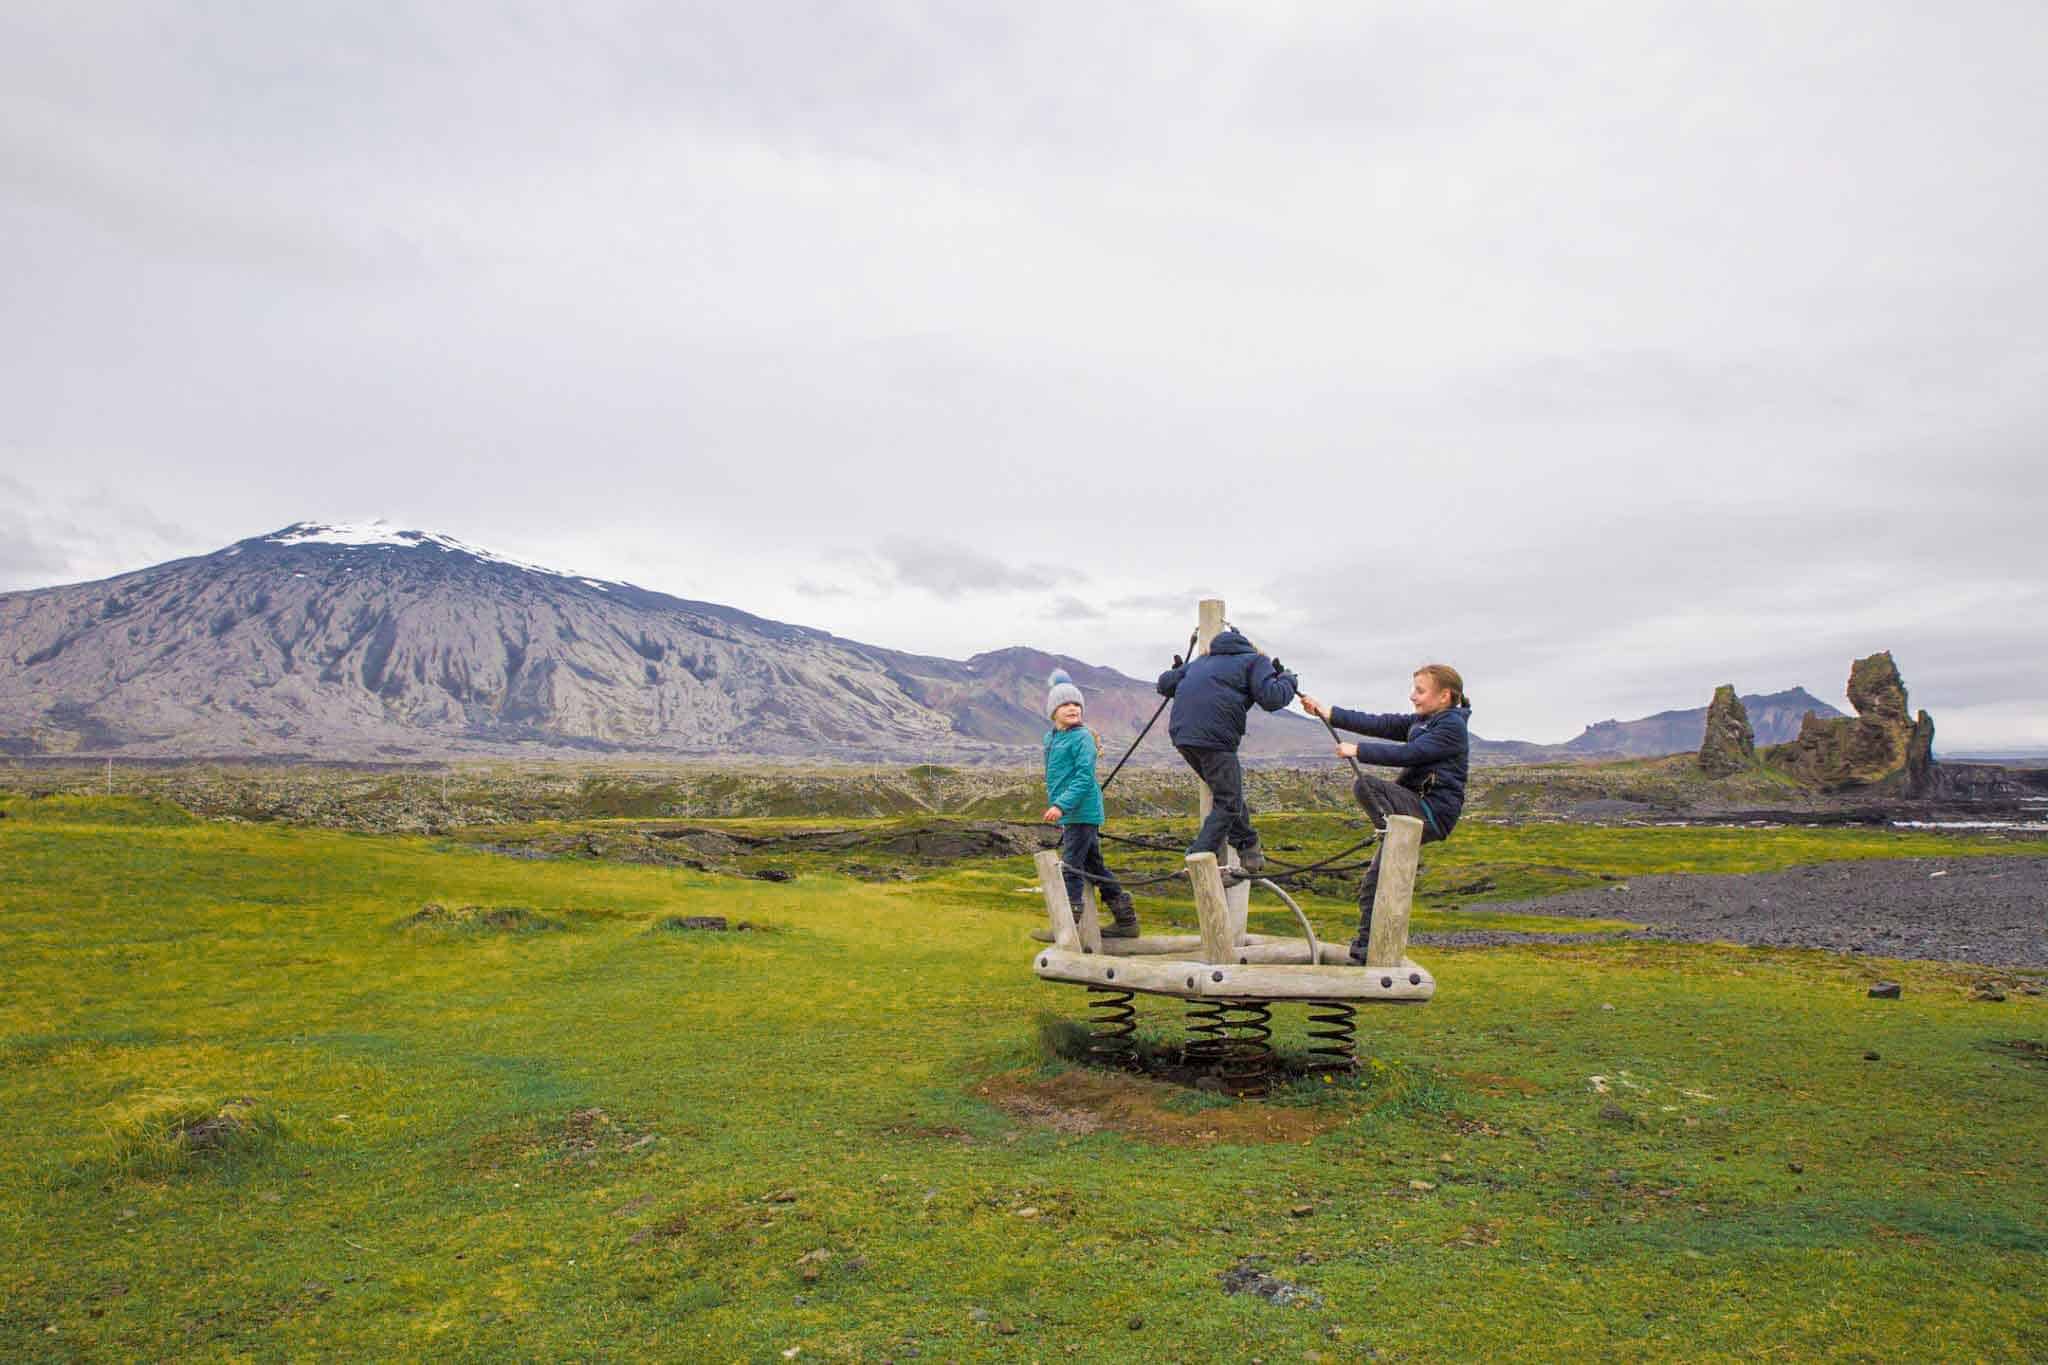 Kids in Playground in Iceland 